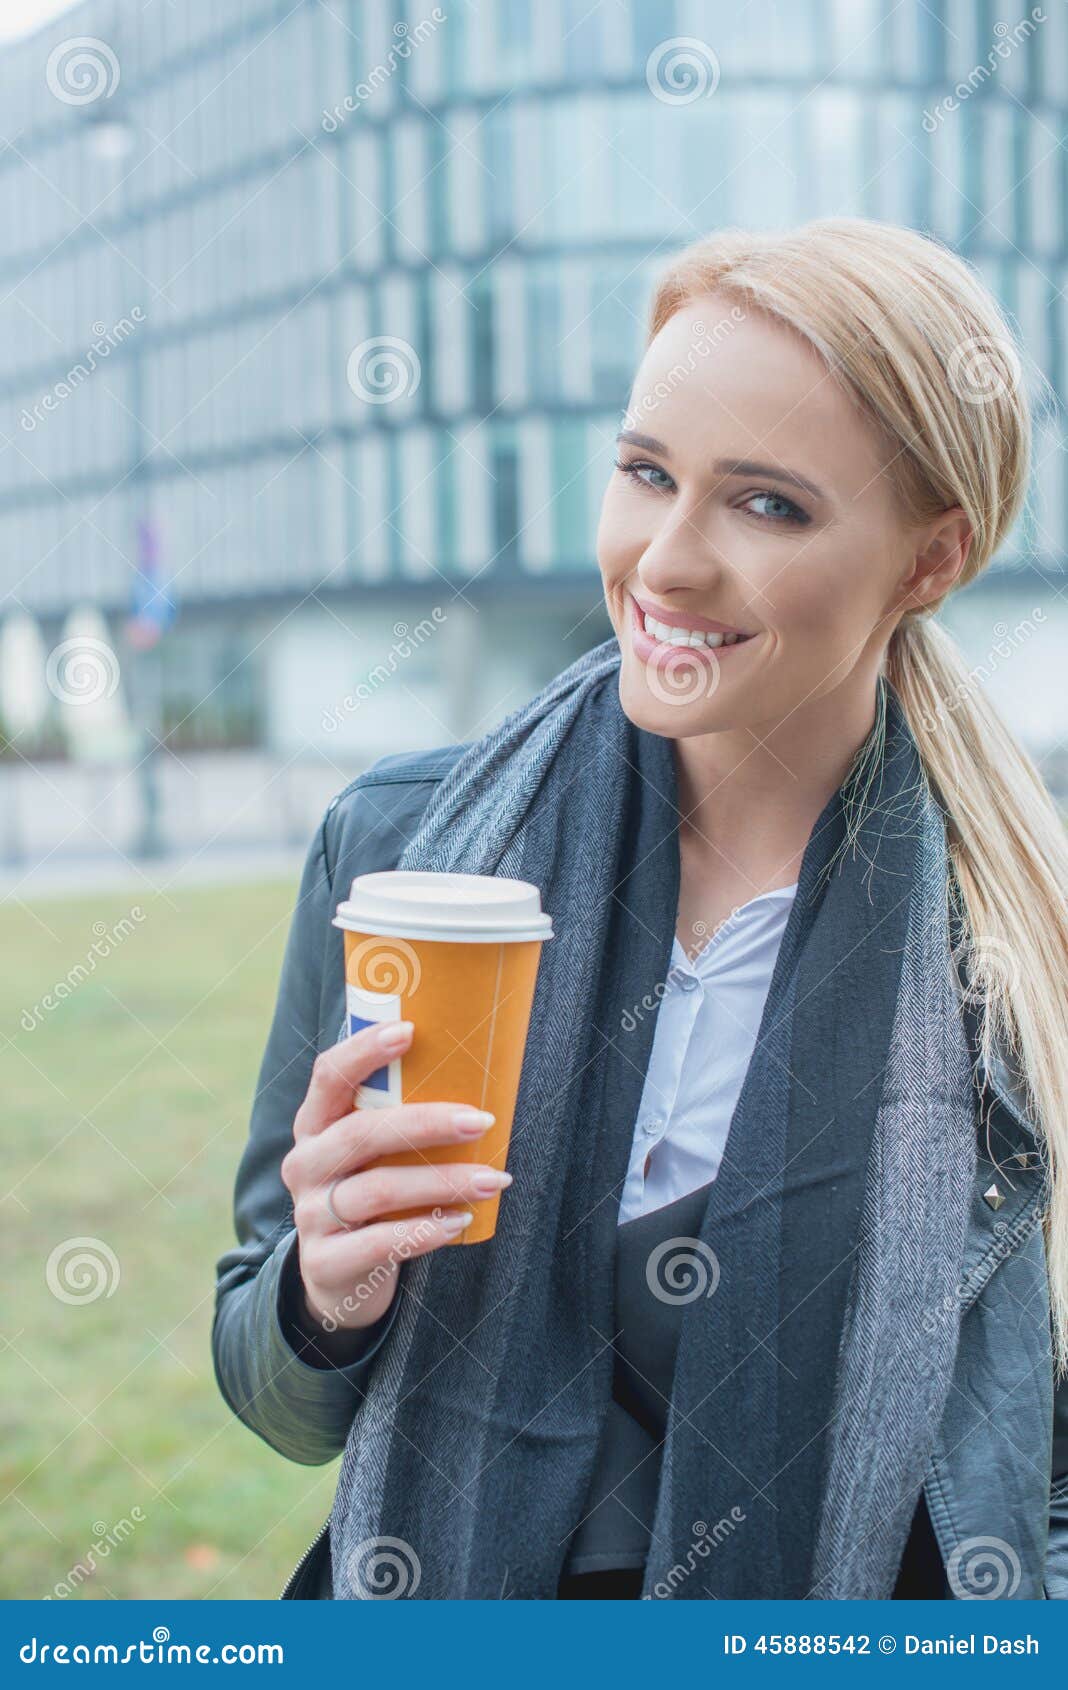 Young Woman Enjoying Coffee on a Cold Day Stock Photo - Image of ...